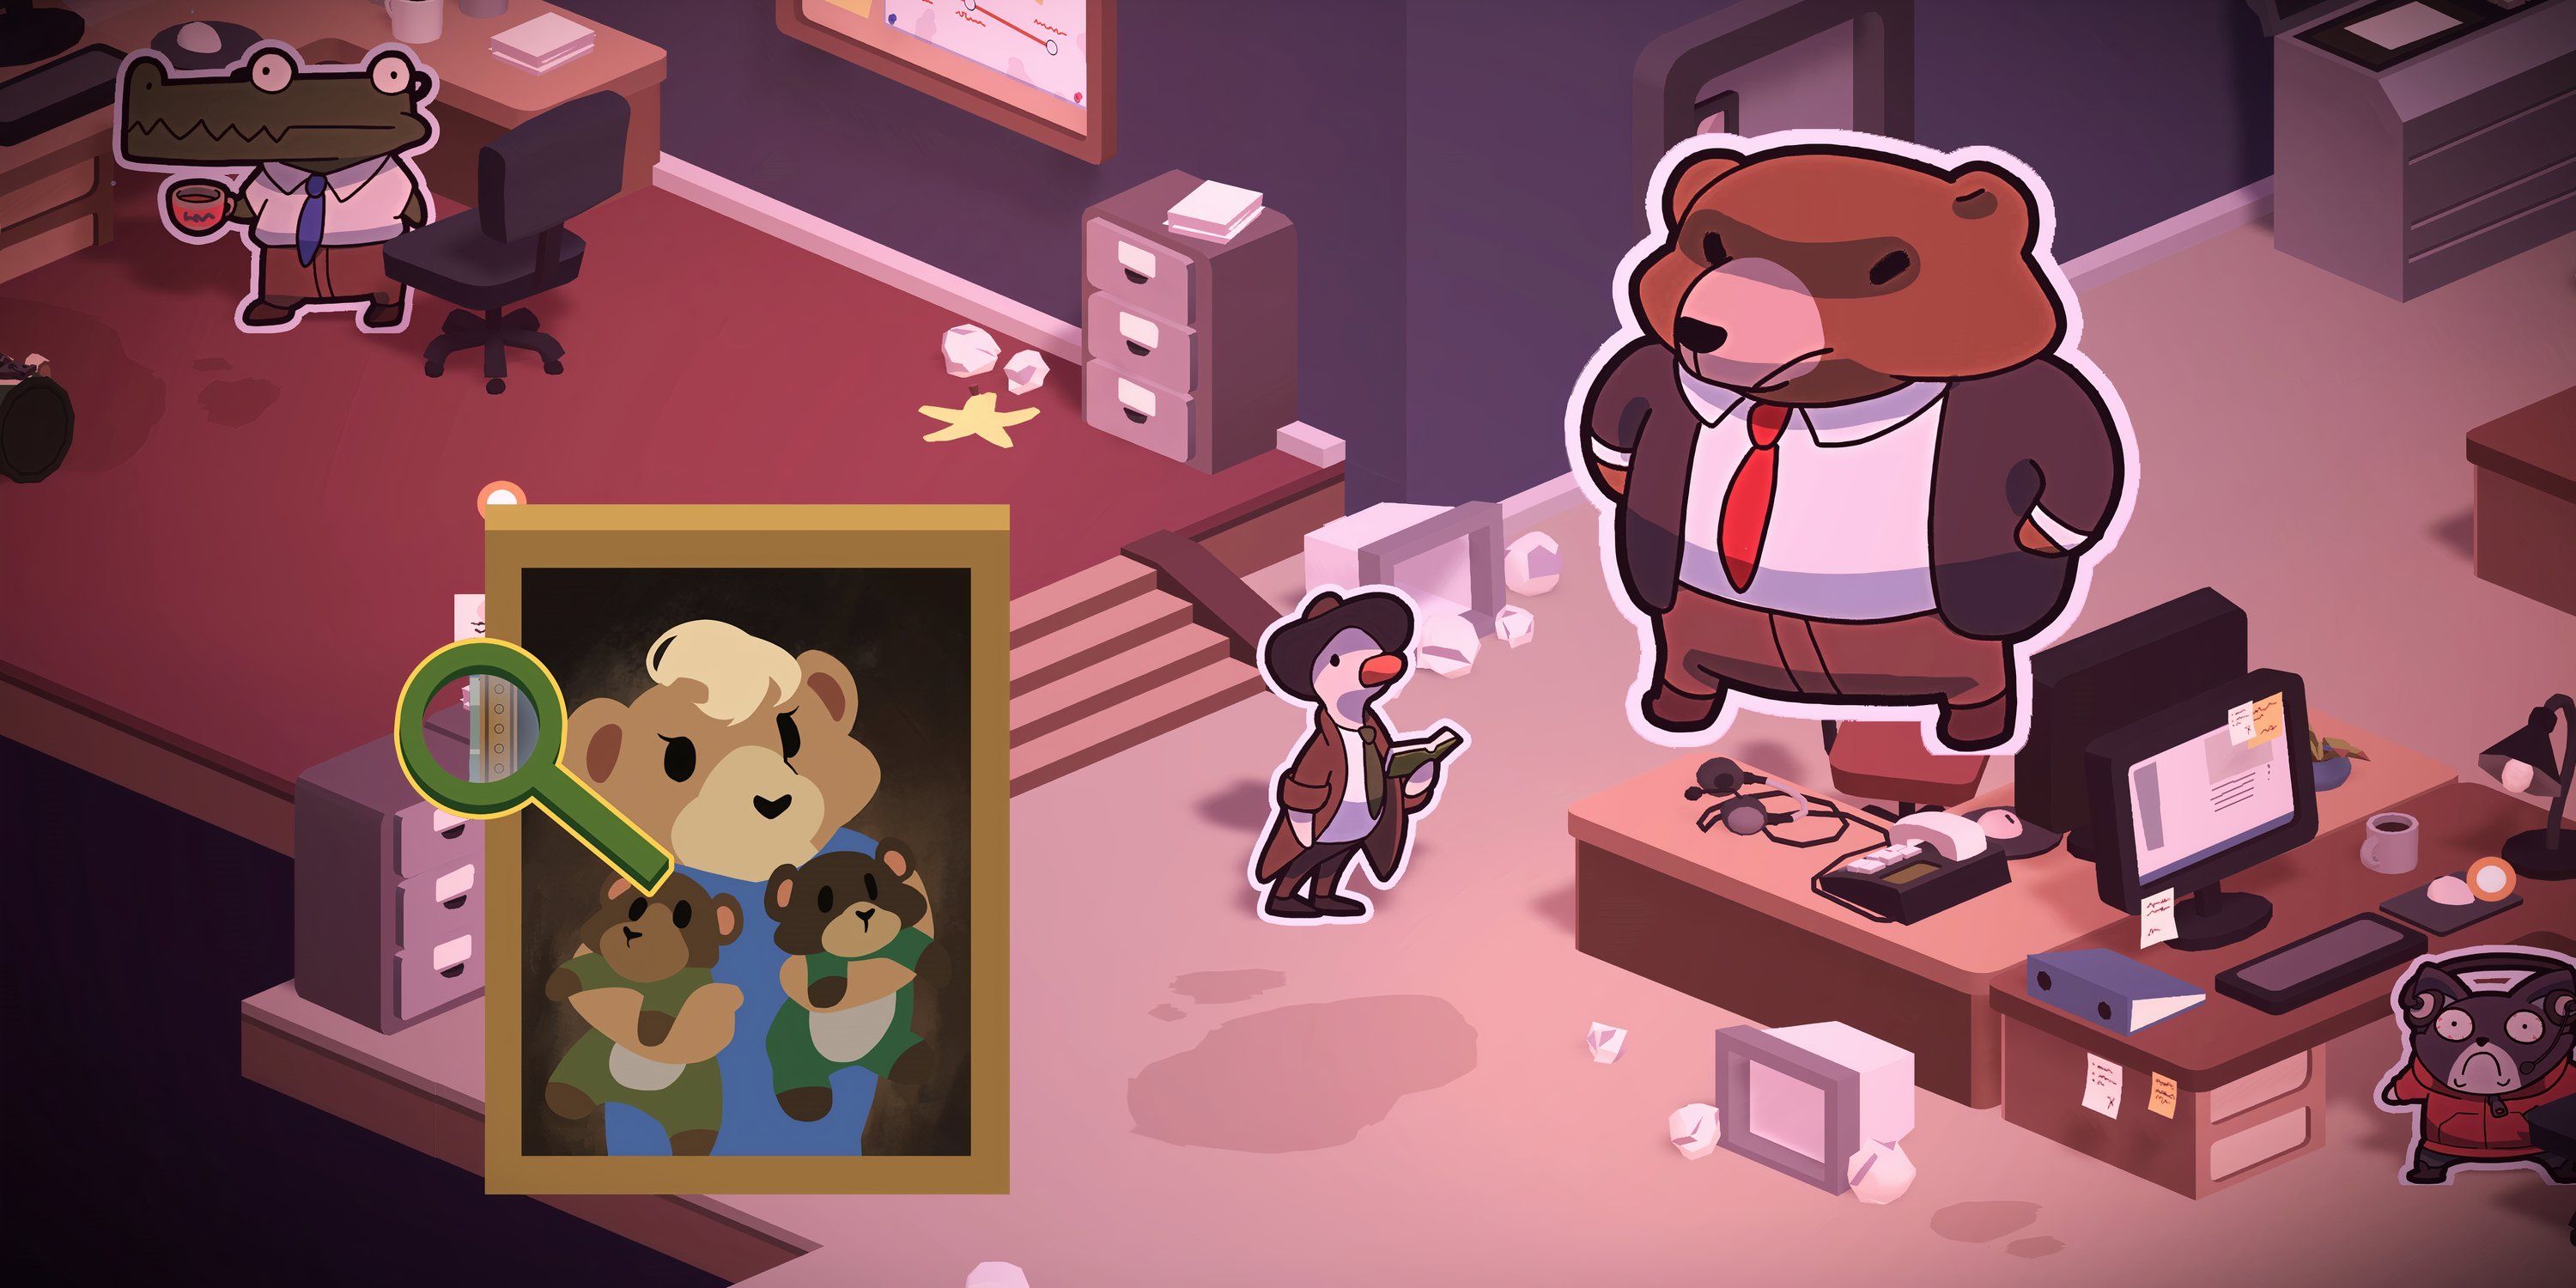 A detective duck standing in the center of an office. A large painting is on the left, and a large bear is on the right.